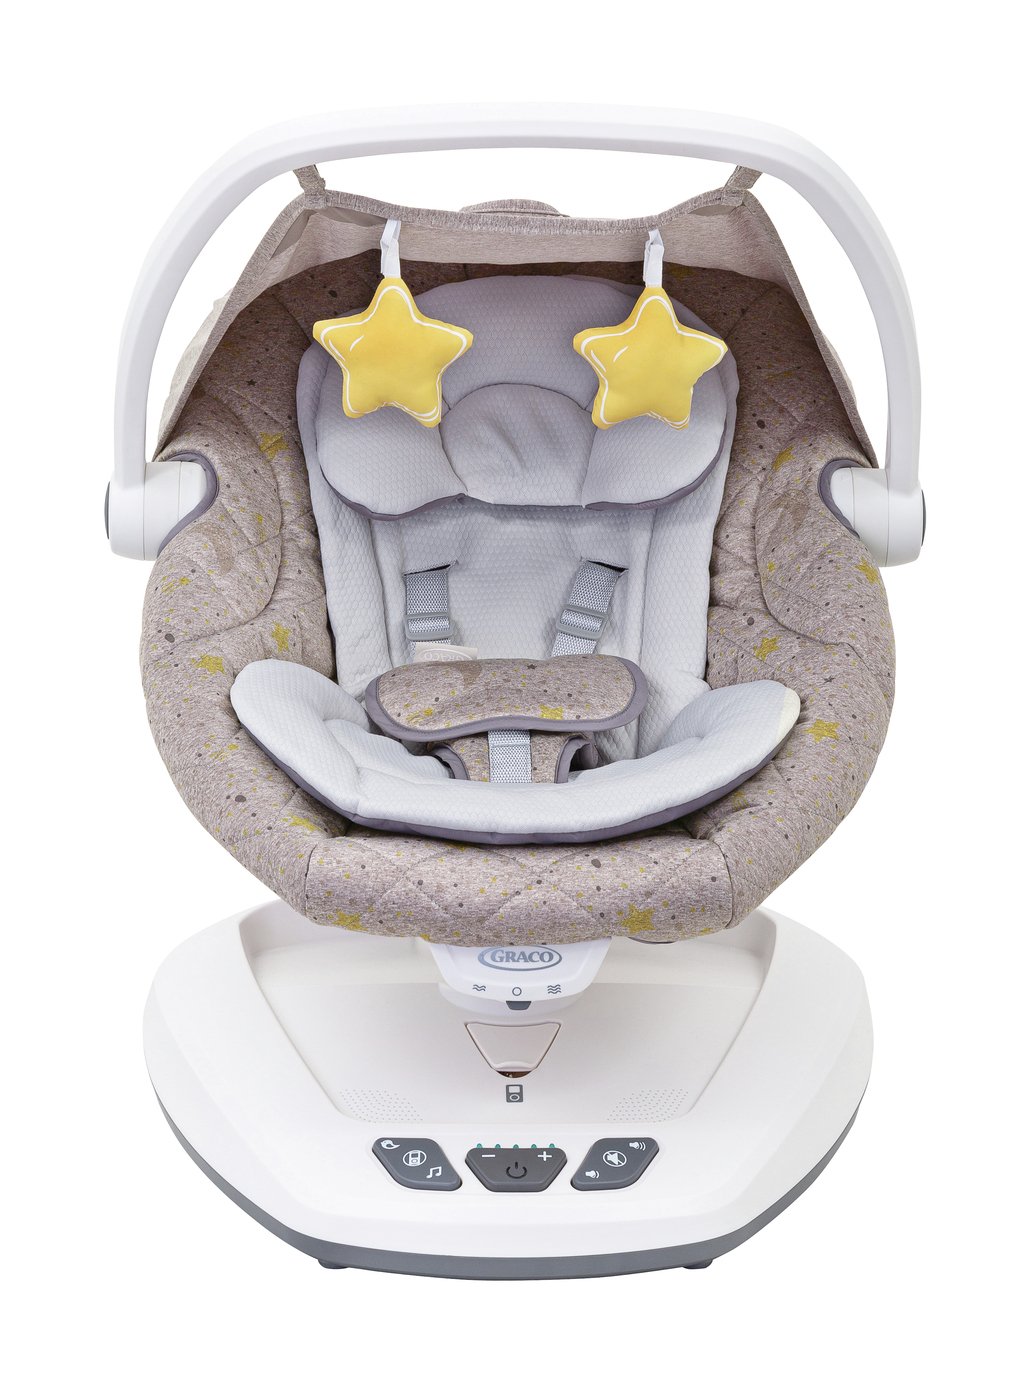 Graco Move With Me Baby Swing with Canopy Stargazer review